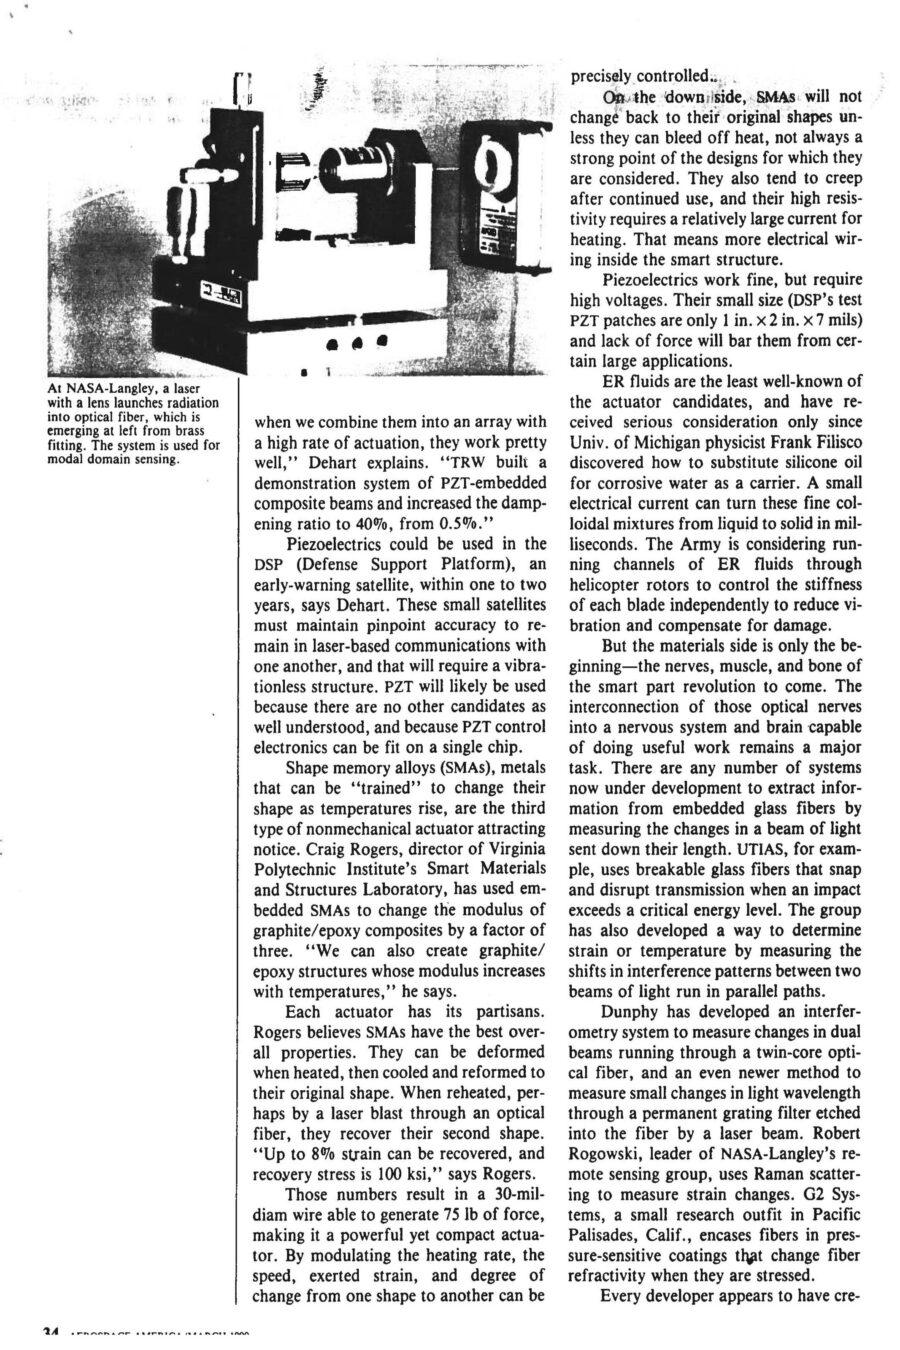 Magazine clipping from Aerospace America, March, 1990
Headline: Materials get smarter: “Smart structures” will change the ways aircraft and spacecraft are built, maintained, and flown.
Byline: Alan S. Brown, Materials Editor
Photo 1, page 2: Three small photos of a hand holding a thick wire. In the first, the wire is coiled in a spiral. In the second, it’s shaped like a hook. In the third, the wire is straight.
Caption: Shape memory alloys can be “trained” to change shape with a rise in temperature. After deformation, this nickel-titanium alloy from Virginia Polytechnic Institute regains its original shape by the addition of heat.
Photo 2, page 3: A long metal beam on the floor of a lab.
Caption: At VPI, composite cantilevered beam has a piezo-electric pad attached, which is wired to an amplifier fed by a variable oscillator. When the oscillator is set at twice the beam’s natural frequency the beam vibrates, caused by alternating shortening and relaxing of the piezoelectric pad as the sine wave signal is sent to it. Possible applications include controlling flutter.
Photo 3, page 4: A cylindrical metal fuselage hooked up to testing equipment.
Caption: In a VPI/University of Adelaide effort, an aircraft fuselage model was used to study active acoustic control to dampen vibration.
Photo 4, inset, page 4: Close-up of a plane wing, wires running across it.
Caption: University of Toronto Institute for Aerospace Studies has been conducting static tests on a smart wing leading edge in which optical fibers have been embedded for damage detection. Red dots correspond to laser light bleeding through Kevlar/epoxy from impact-fractured fibers.
Photo 5, page 5: A laser device next to a mounted brass fitting, optical fibre emerging from the fitting.
Caption: At NASA-Langley, a laser with a lens launches radiation into optical fibre, which is emerging at left from brass fitting. The system is used for modal domain sensing.
Photo 6, page 6: Close on a scientist holding a coil of wire.
Caption: At United Technologies Research Center, scientists successfully embedded optical fibre sensors in composite materials for measuring temperature, strain, pressure and vibration.
Here come smart parts. In the not-too-distant future, composite prepregs with embedded sensors will monitor their own cure and alert processors when temperature and pressure adjustments are needed. After curing, the same sensors will rapidly assess post-cure quality. Smart structures will be linked to an aircraft’s central computer, just as our limbs and muscles are tied to our central nervous system, to provide faster, cheaper and safer flights. They will monitor in-flight vehicle health, and even change their shape and stiffness to optimize performance during specific maneuvers.
The pace of development is breathtaking. The Air Force, Navy, NASA and Defense Advanced Research Projects Agency have all begun to underwrite research in the field. Boeing De Havilland has already begun static tests on a smart wing leading edge. Raymond Measures, associate director the University of Toronto Institute for Aerospace Studies, is leading development of the wing, “This leading edge is a real assembly with weaves, honeycombs, and the full range of structures that occur in real aircraft structures. It also contains 300 optical fibres in three layers, a complex operation that took a fabrication team of six to accomplish.”
McDonnel Douglas hopes to test-fly a smart structure on the leading edges of an F-15 wing as early as 1991 or 1992. Even though it dropped the project, United Technologies has already developed a crack-detecting smart helicopter rotor. 
Smart structures could lead to economic and performance breakthroughs in four areas. First is online monitoring during curing of composite materials, which could dramatically boost yields and make composites more competitive with metal. Second is nondestructive evaluation of composite parts. The current method of ultrasonic mapping is time-consuming and can take hours. Embedded optical fibers can cut testing time and expense dramatically. One test developed at UTIAS is to shoot high-intensity laser pulses down a fibre, causing it to rapidly expand and contract, creating measurable acoustic waves throughout the entire fibre, making for faster, simpler testing. Third is vehicle health monitoring. Smart structures can sense strain, fatigue, wear, impact damage, vibration, fracture and delamination, guarding against catastrophic failure. They could be used to determine whether wings are too heavy with ice or cargo too imbalanced for takeoff. Smart structures could also alert when aircraft require maintenance, reducing frequency and intensity of maintenance measures. Fourth is flight control. Because optical fibers can transmit more than one signal at a time, researchers hope to use the same fibers that monitor health to control the craft. They could serve as the communications pathways between the craft’s avionics and the motors controlling the ailerons, elevators and rudder. Adaptive structures could also be built to change shape and stiffness to compensate for structural damage or heighten performance. Measures say, “Ultimately we want to build adaptive intelligence into the materials through the use of neural networks, so that the structure ‘learns’ about the relationship between, say, strain and a given maneuver. Let’s say we want to change the shape of an airfoil. You train the sensory system to memorize the loads placed on a structure. When you duplicate that shape, it automatically knows how to accomplish it.”
The current state of smart part art is still years away from the more sophisticated uses envisioned by theorists. But there is already consensus that fibre optic glass will be a material of choice. They are small, compatible with existing composites technology, have ideal electrical properties, and are lightweight and take up little room. Finally, glass fibres are cheap, costing only pennies per foot for telecommunications wire.
There is less consensus on which actuators to use. Most researchers would prefer to use nonmechanical actuators – materials that change their shape without any moving parts. Electrorheological (ER) fluids, for example, can turn from liquid to solid milliseconds after application of a small electrical current, and could be useful to dampen vibration in space structures that require pinpoint accuracy, such as telescopes and monitoring devices. Piezoelectrics are a different actuator that could be utilized in a similar manner. A third kind of actuator is shape memory alloys (SMAs), which can be “trained” to change their shape as temperatures rise. Each actuator has its partisans.
Beyond materials considerations lies the interconnection of those optical nerves into a nervous system and brain capable of doing useful work. Many systems are under development to extract information from embedded glass fibres by measuring the changes in a beam of light sent down their length. The University of Toronto Institute for Aerospace Studies, for example, uses breakable glass fibres that snap and disrupt transmission when an impact exceeds a critical energy level. The group has also developed a way to determine strain or temperature by measuring the shifts in interference patterns between two beams of light run in parallel paths. Others have developed their own sensing systems.
Monitoring a network of sensors that is large and complex may require more computing power than we can comfortably fit on an aircraft, perhaps even a small supercomputer. That is why theorists are interested in artificial intelligence programs, as they may prove capable of searching through masses of information to discern the shape of potential problems. “Smart structures will make mechanical failure a thing of the past,” says Professor Measures.